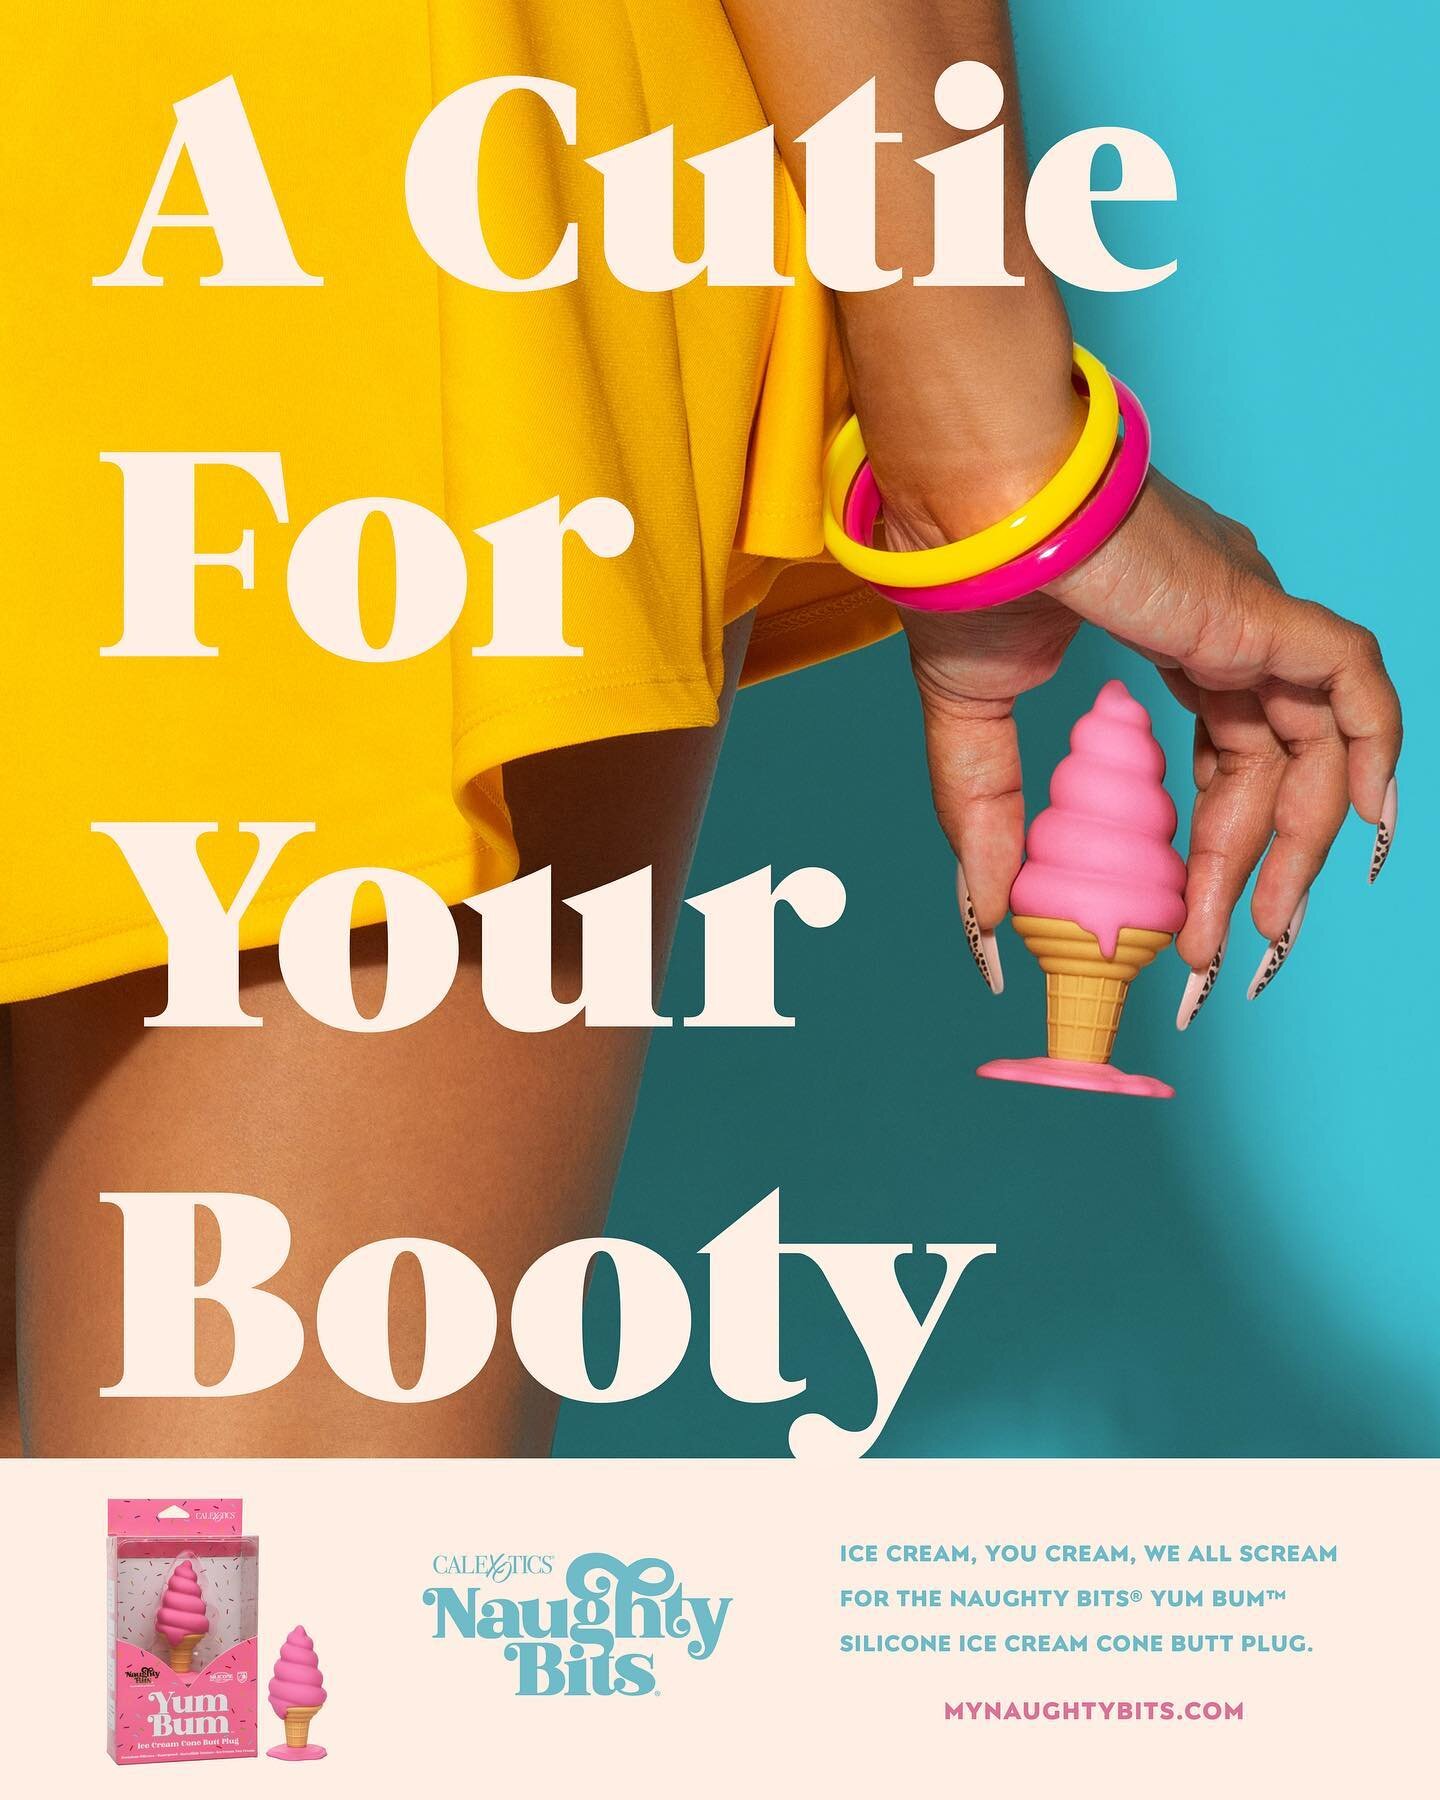 Ice cream, you scream, we all cream for Naughty Bits&rsquo; new silicone Yum Bum ice cream butt plug. It&rsquo;s a cutie for your booty. Restocking soon at your favorite adult retailer and at mynaughtybits.com.
.
.
.
@calexotics @woodrocketproducts #